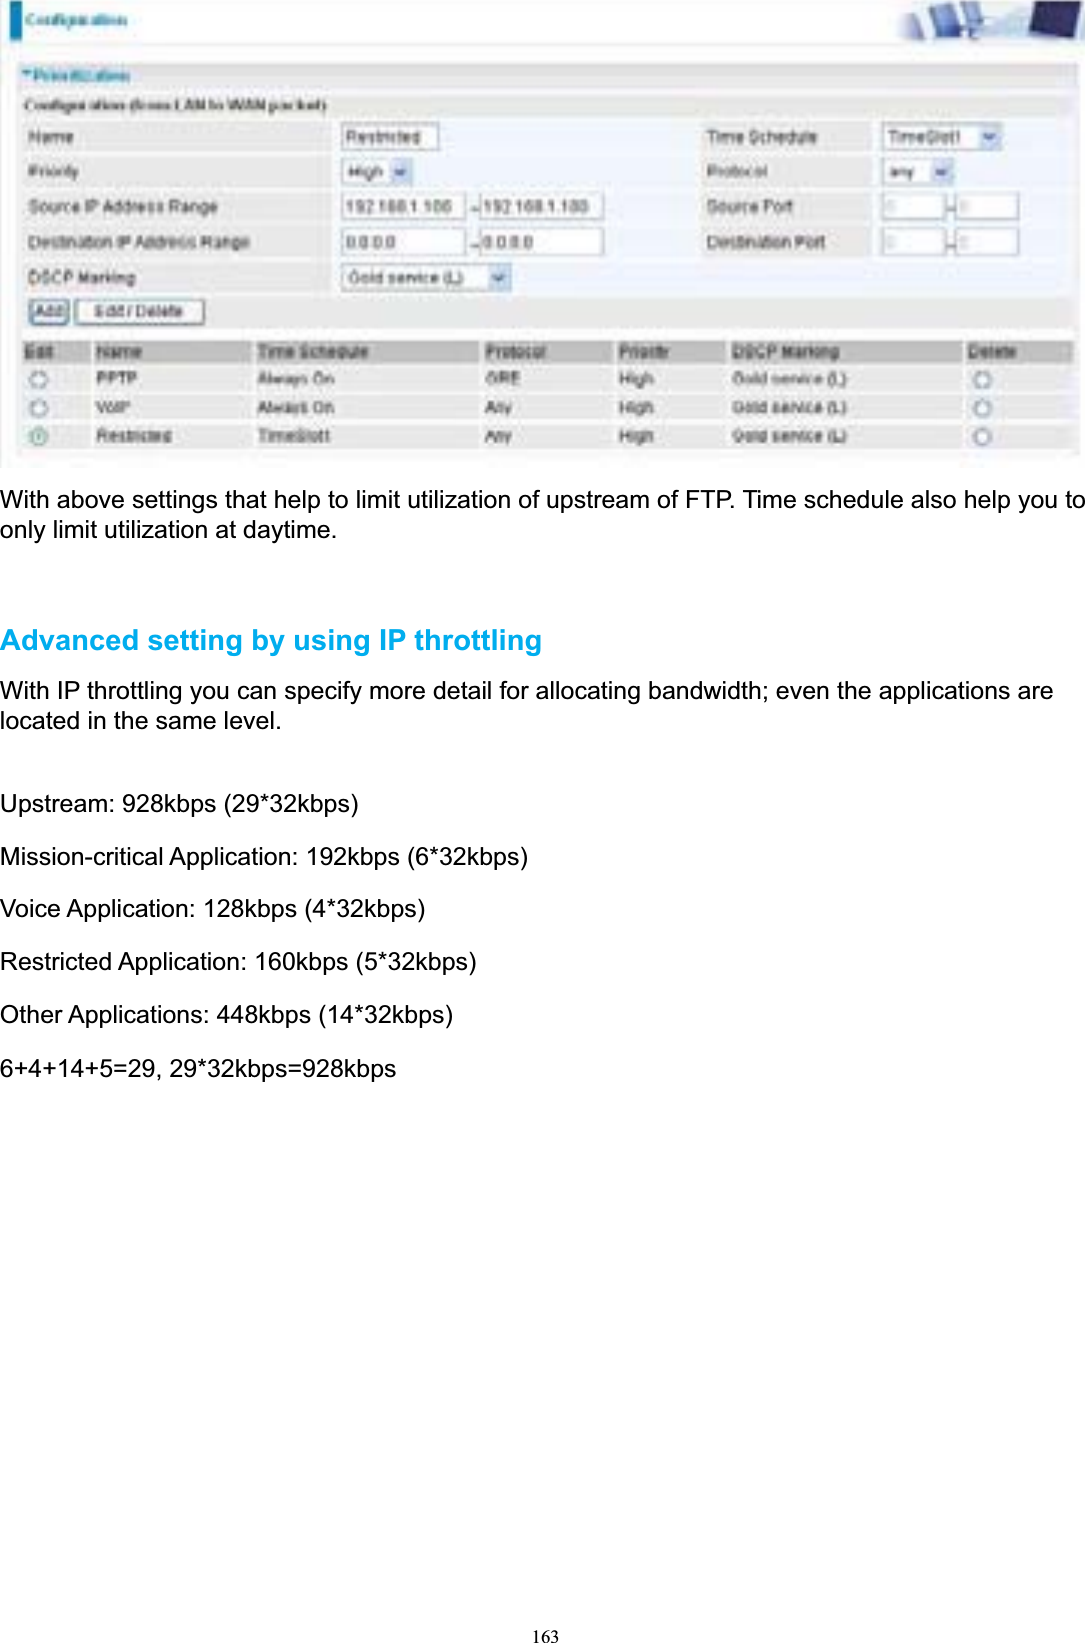 163With above settings that help to limit utilization of upstream of FTP. Time schedule also help you to only limit utilization at daytime. Advanced setting by using IP throttlingWith IP throttling you can specify more detail for allocating bandwidth; even the applications are located in the same level. Upstream: 928kbps (29*32kbps) Mission-critical Application: 192kbps (6*32kbps) Voice Application: 128kbps (4*32kbps) Restricted Application: 160kbps (5*32kbps) Other Applications: 448kbps (14*32kbps) 6+4+14+5=29, 29*32kbps=928kbps 